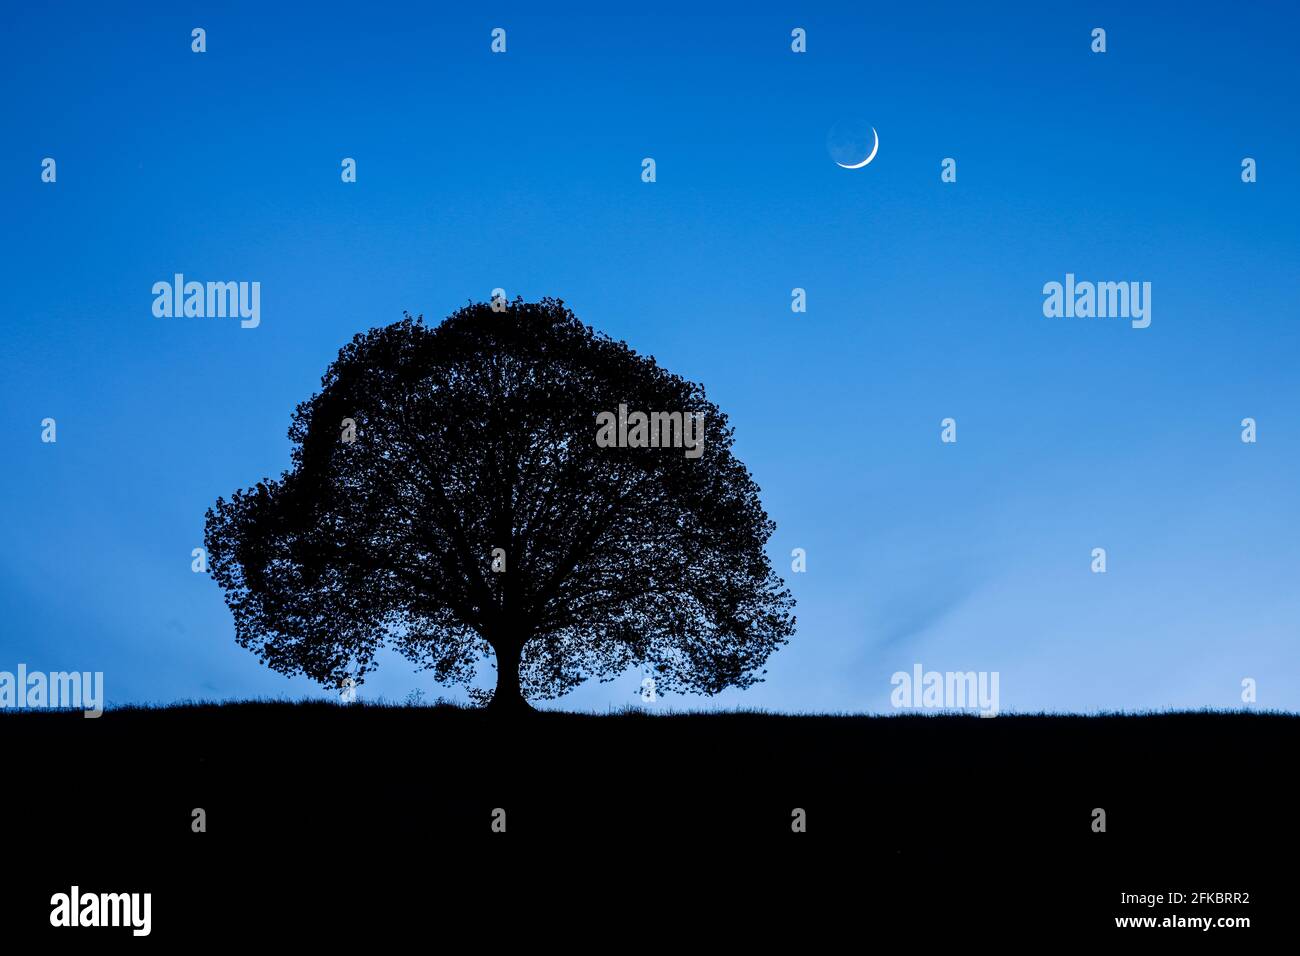 Silhouette of lime tree at night under crescent moon and night sky, Zurich, Switzerland, Europe Stock Photo